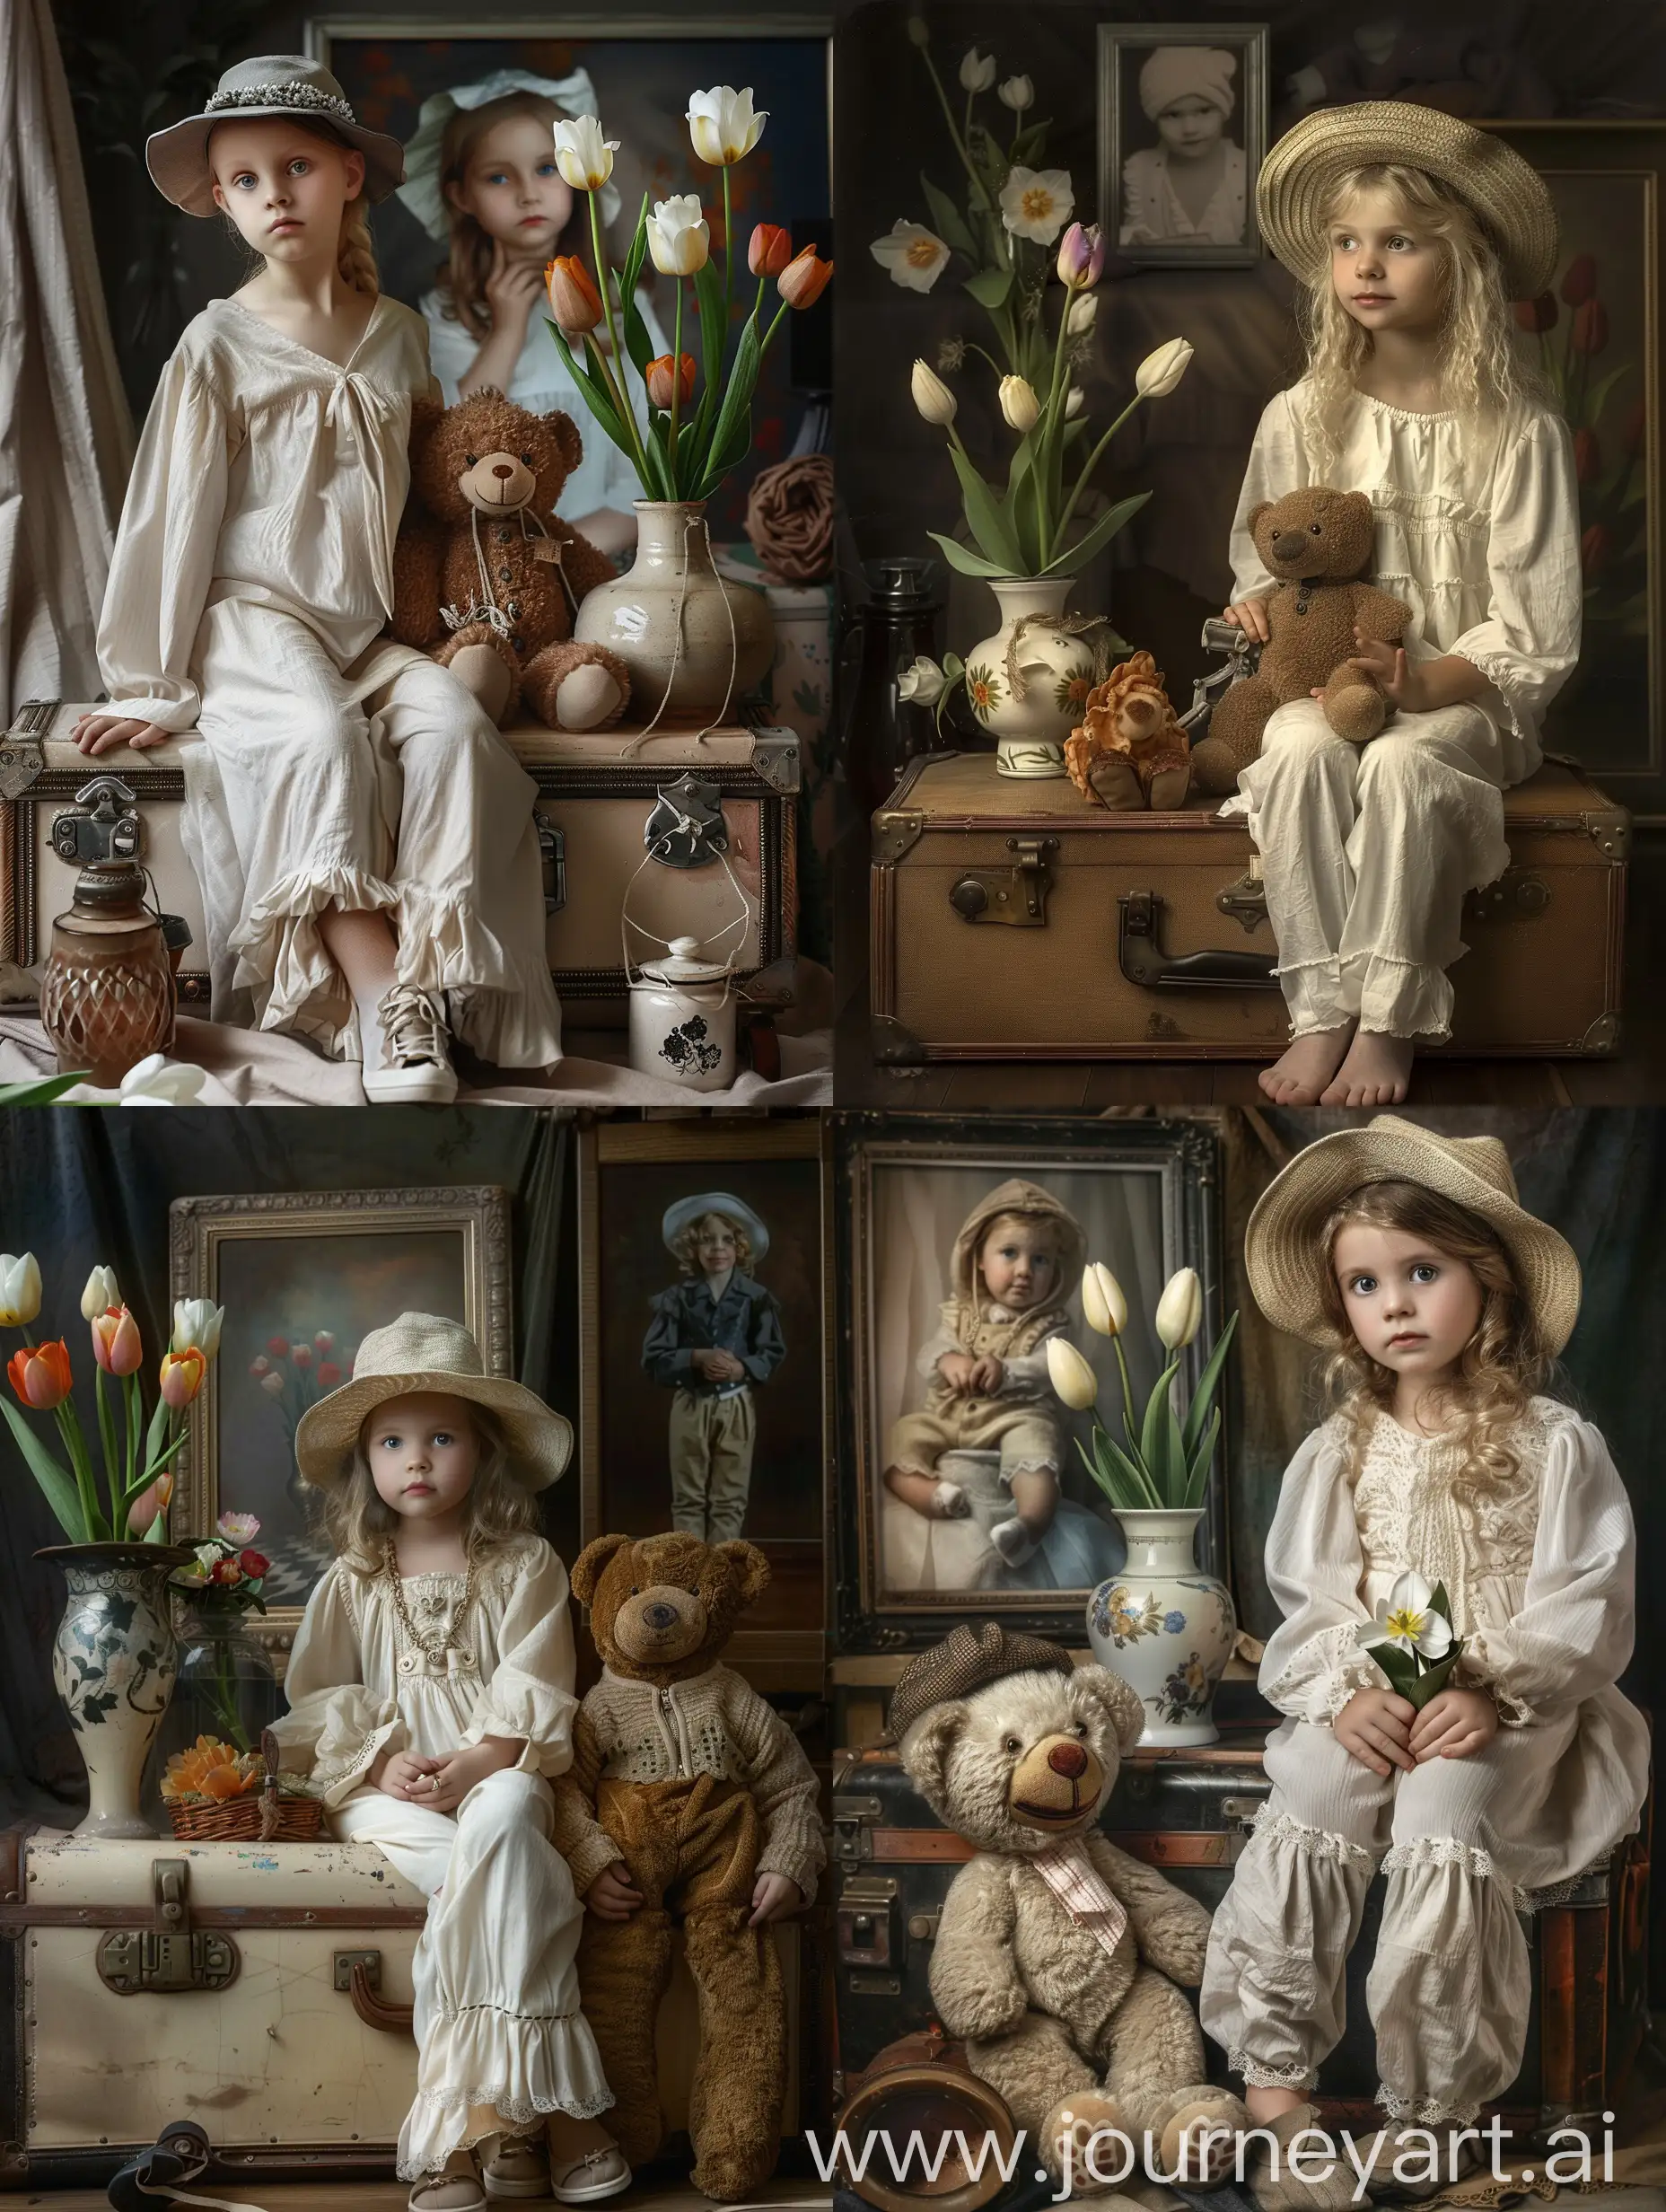 Little white girl sitting on a suitcase next to a teddy bear, painting, art photography, tulip, beautiful studio lighting, vase of flowers, baggy clothes and hat, portrait photo in background, holding flowers, oil painting, airbrush, v 6